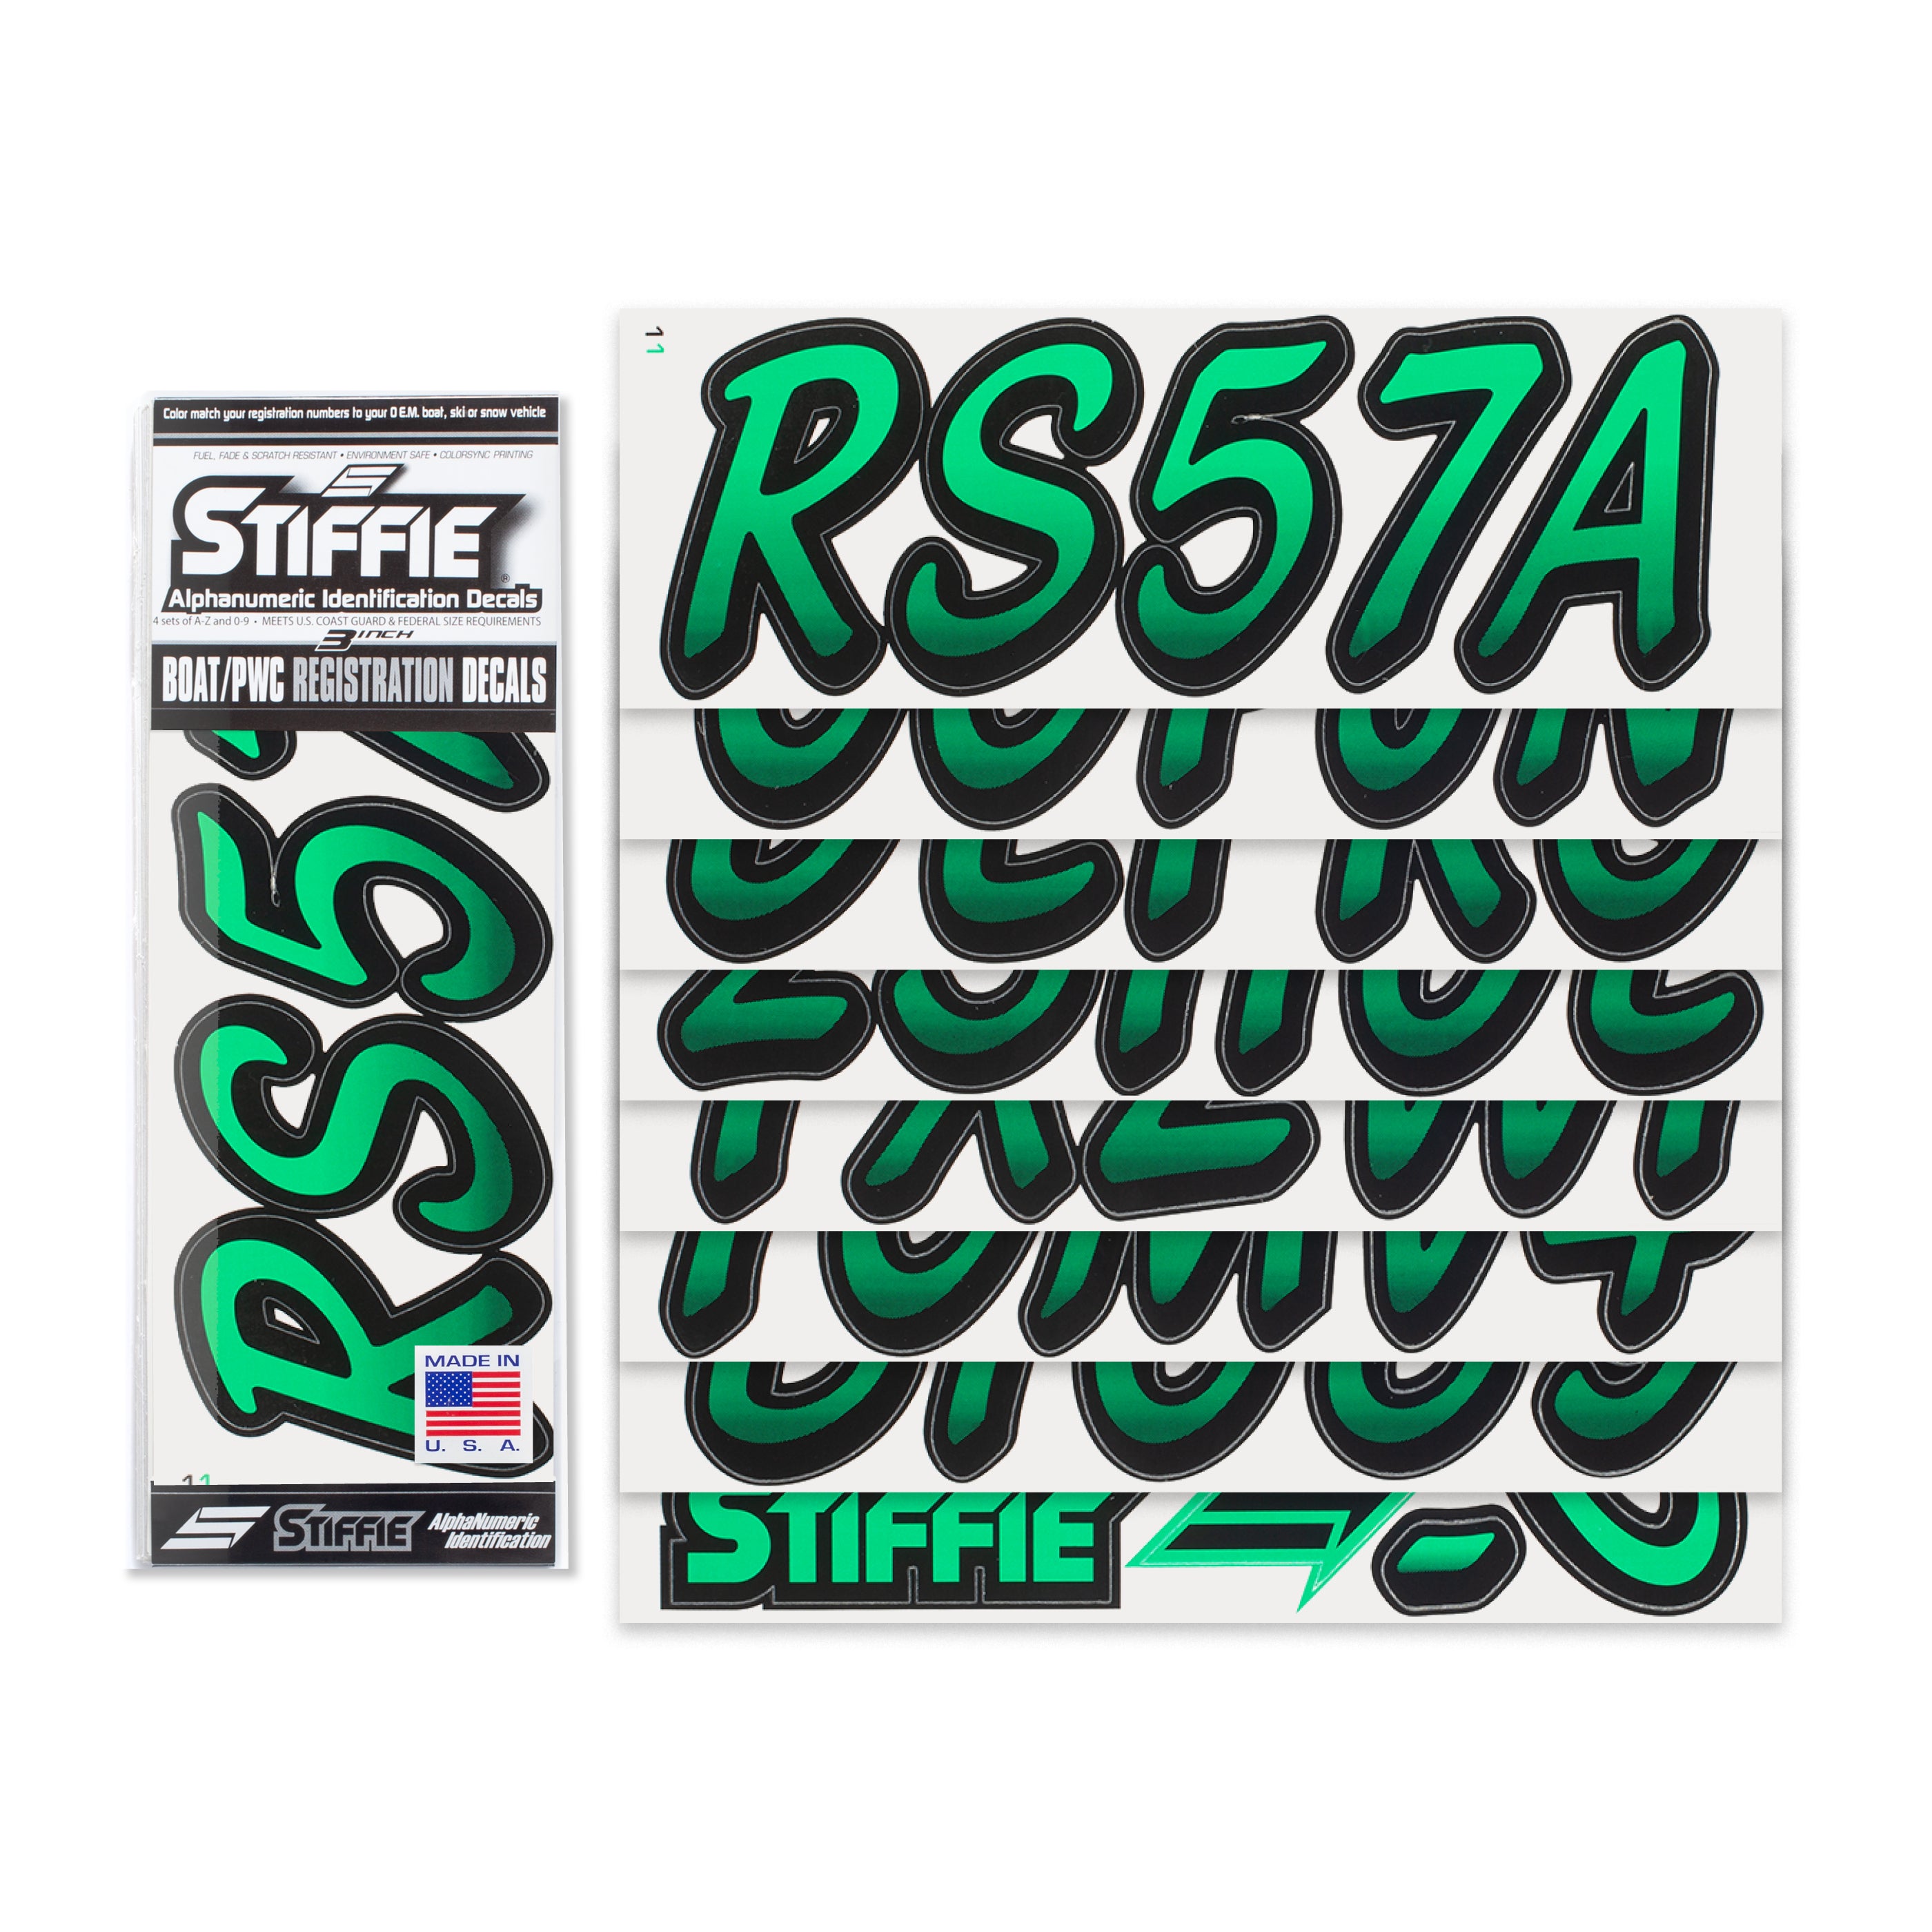 STIFFIE Whipline Seafoam Green / Black 3" Alpha-Numeric Registration Identification Numbers Stickers Decals for Boats & Personal Watercraft